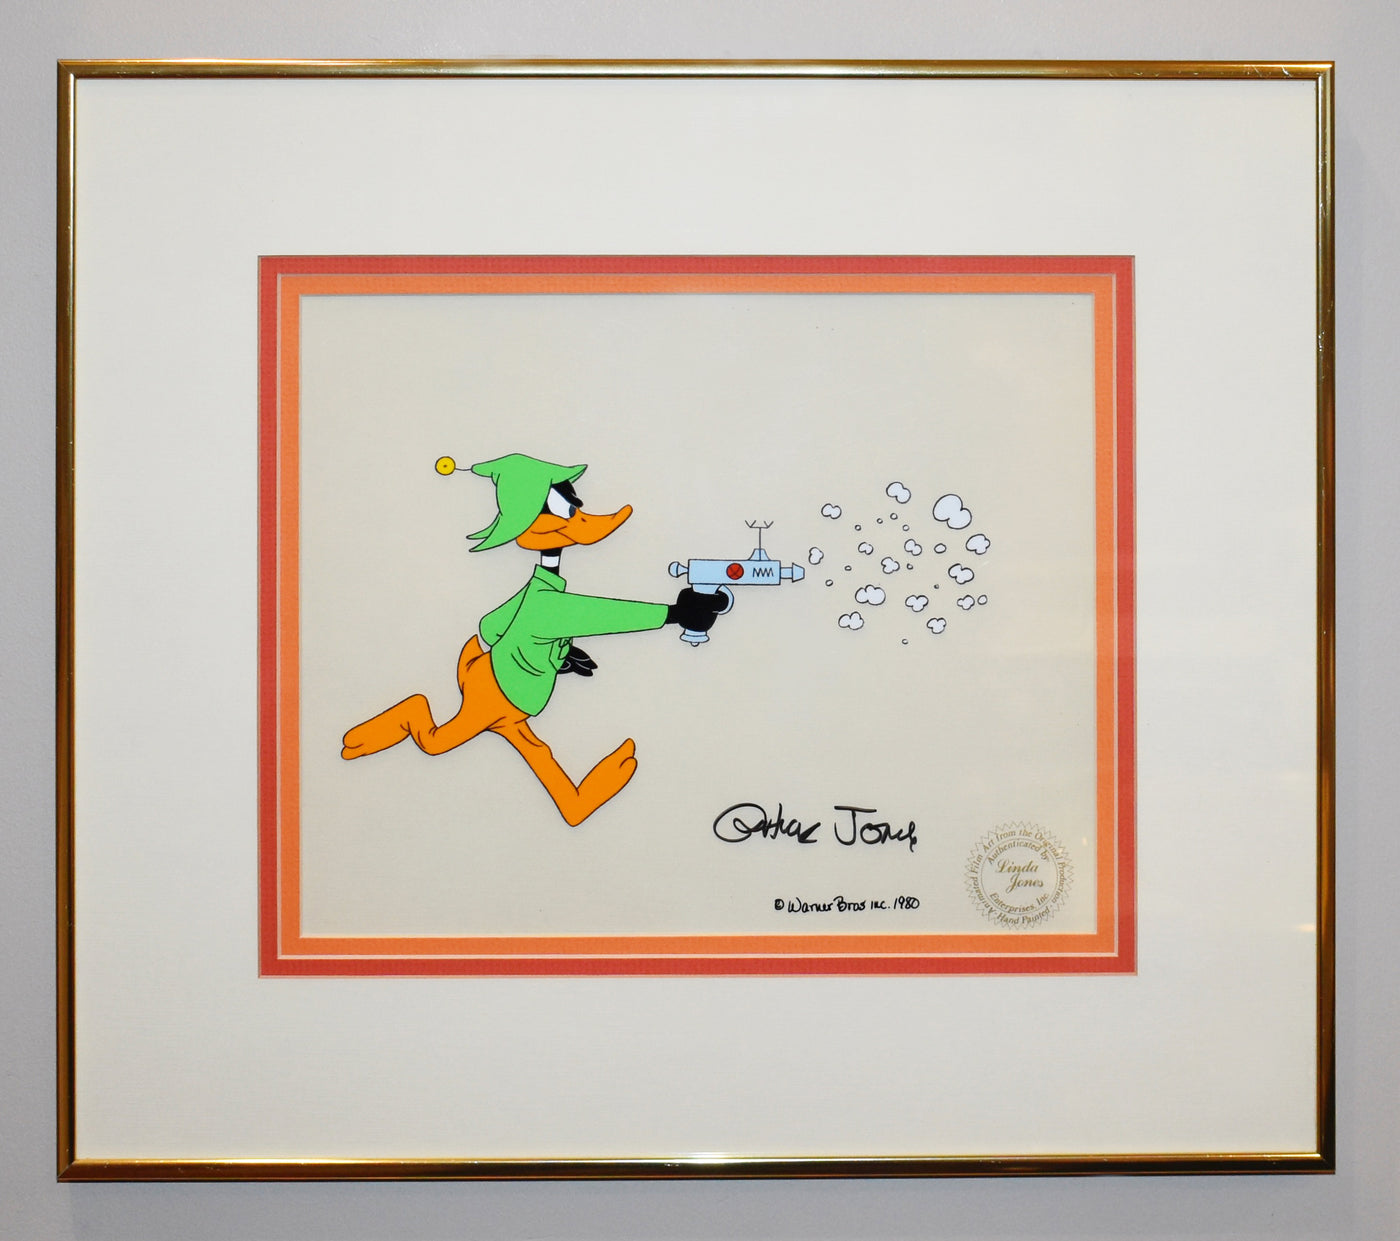 Original Warner Brothers Production Cel Featuring Daffy Duck, Signed by Chuck Jones